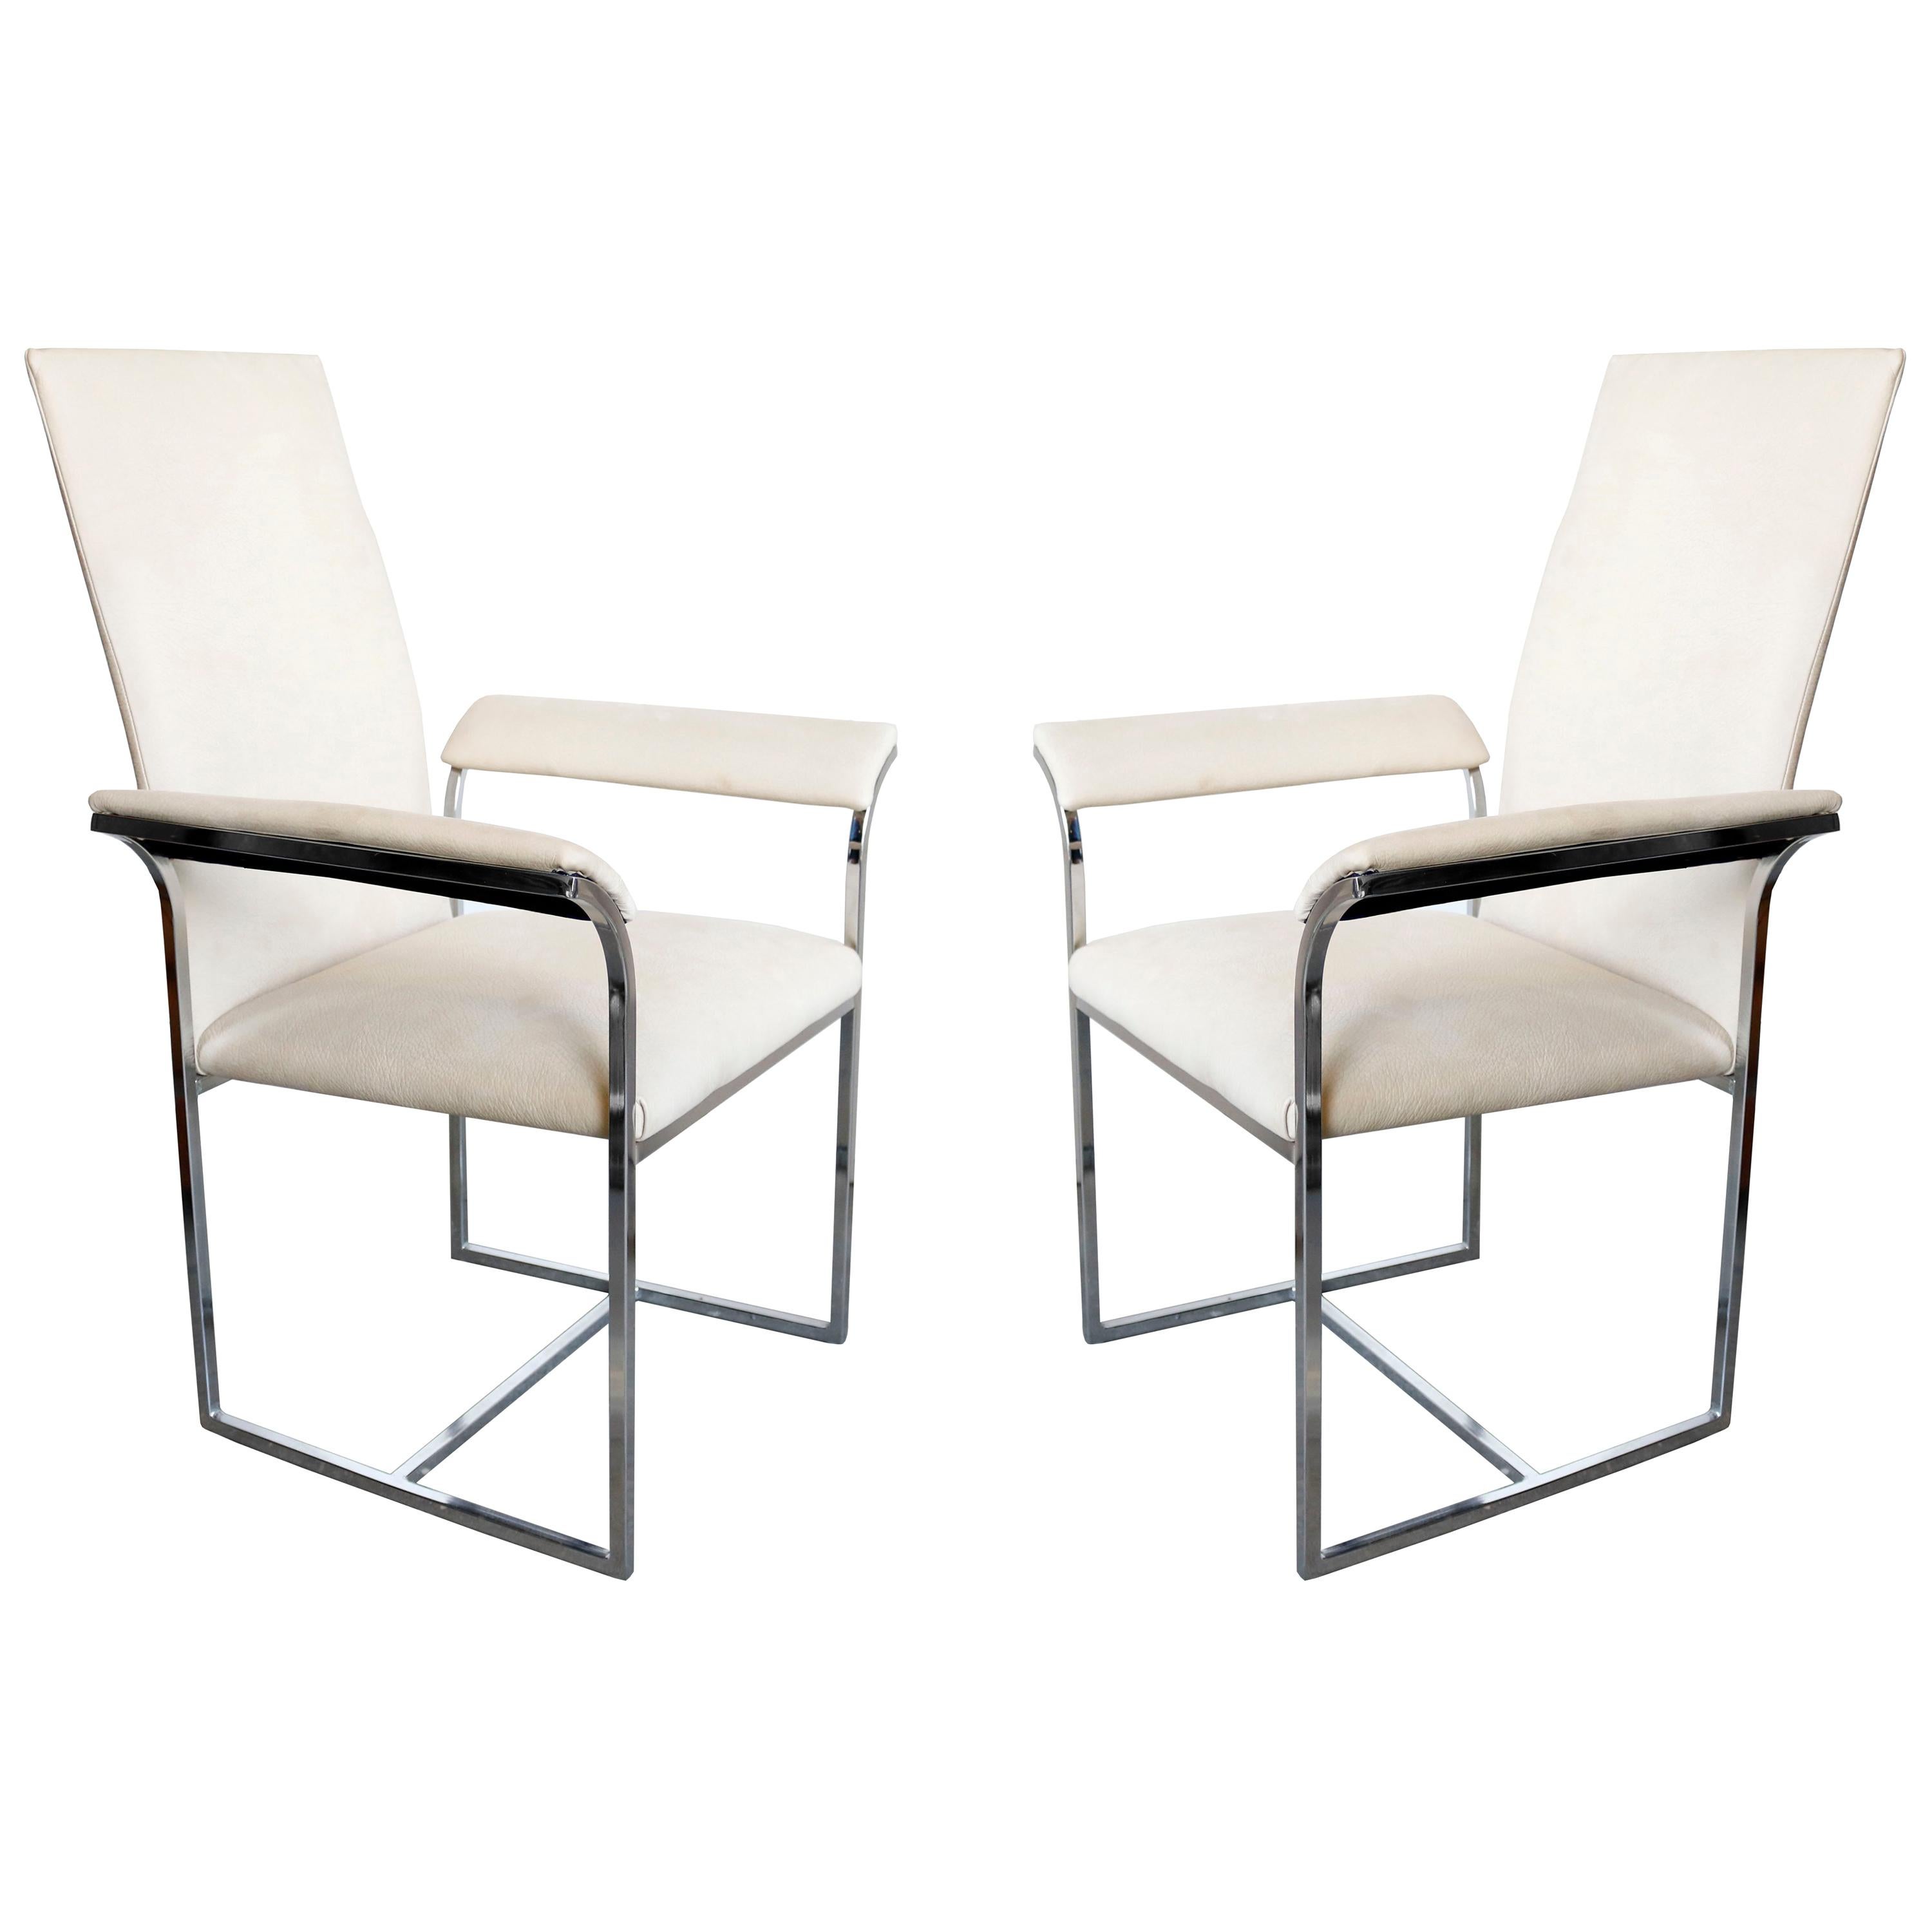 A Pair of Chairs by Milo Baughman for Thayer Coggin